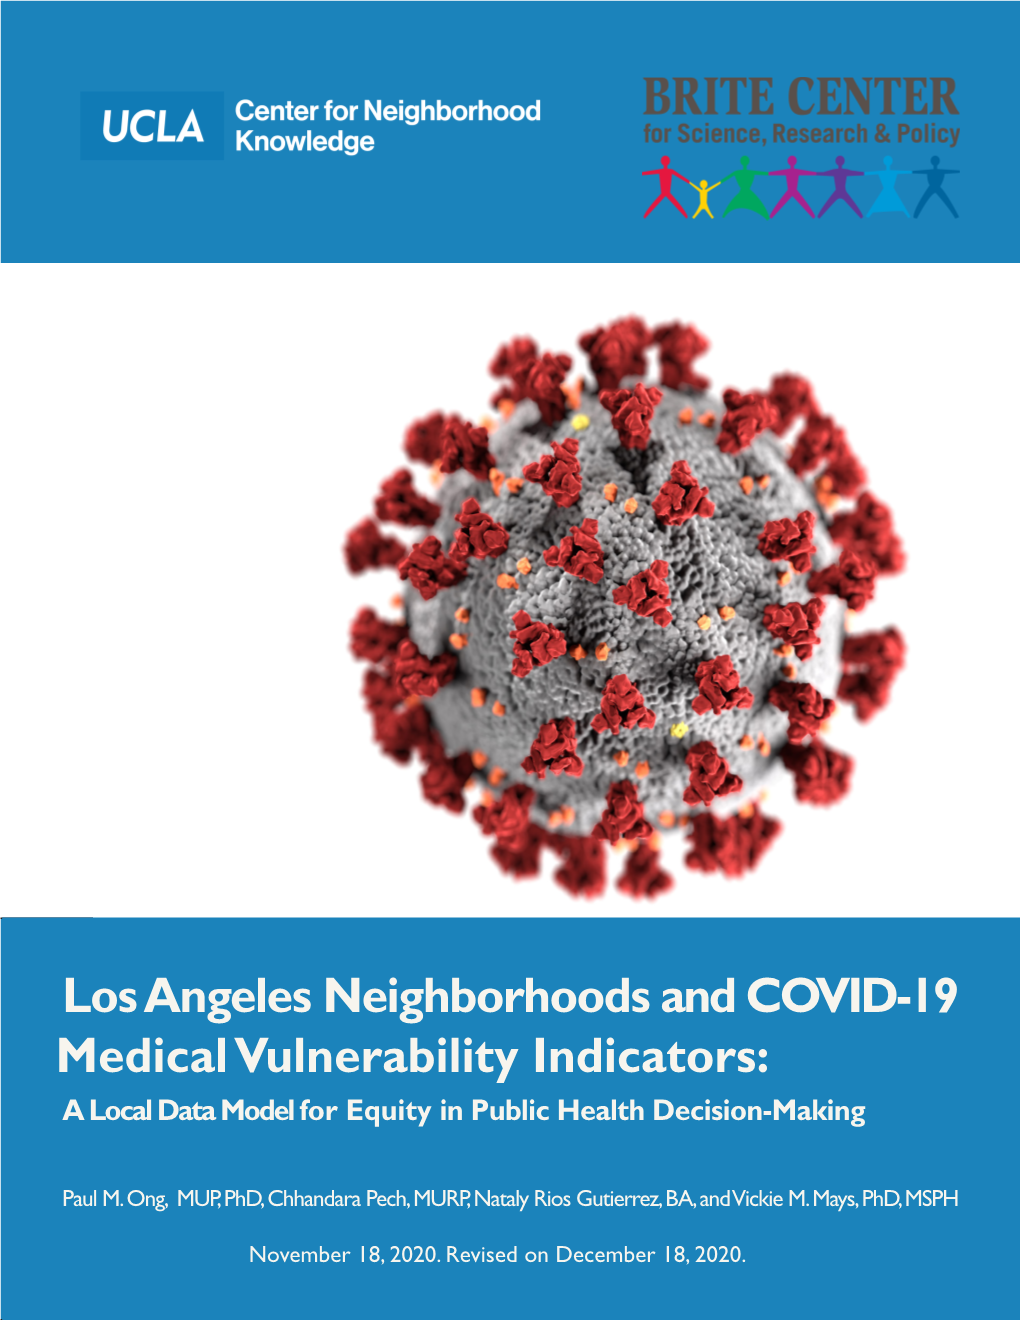 Los Angeles Neighborhoods and COVID-19 Medical Vulnerability Indicators: a Local Data Model for Equity in Public Health Decision-Making